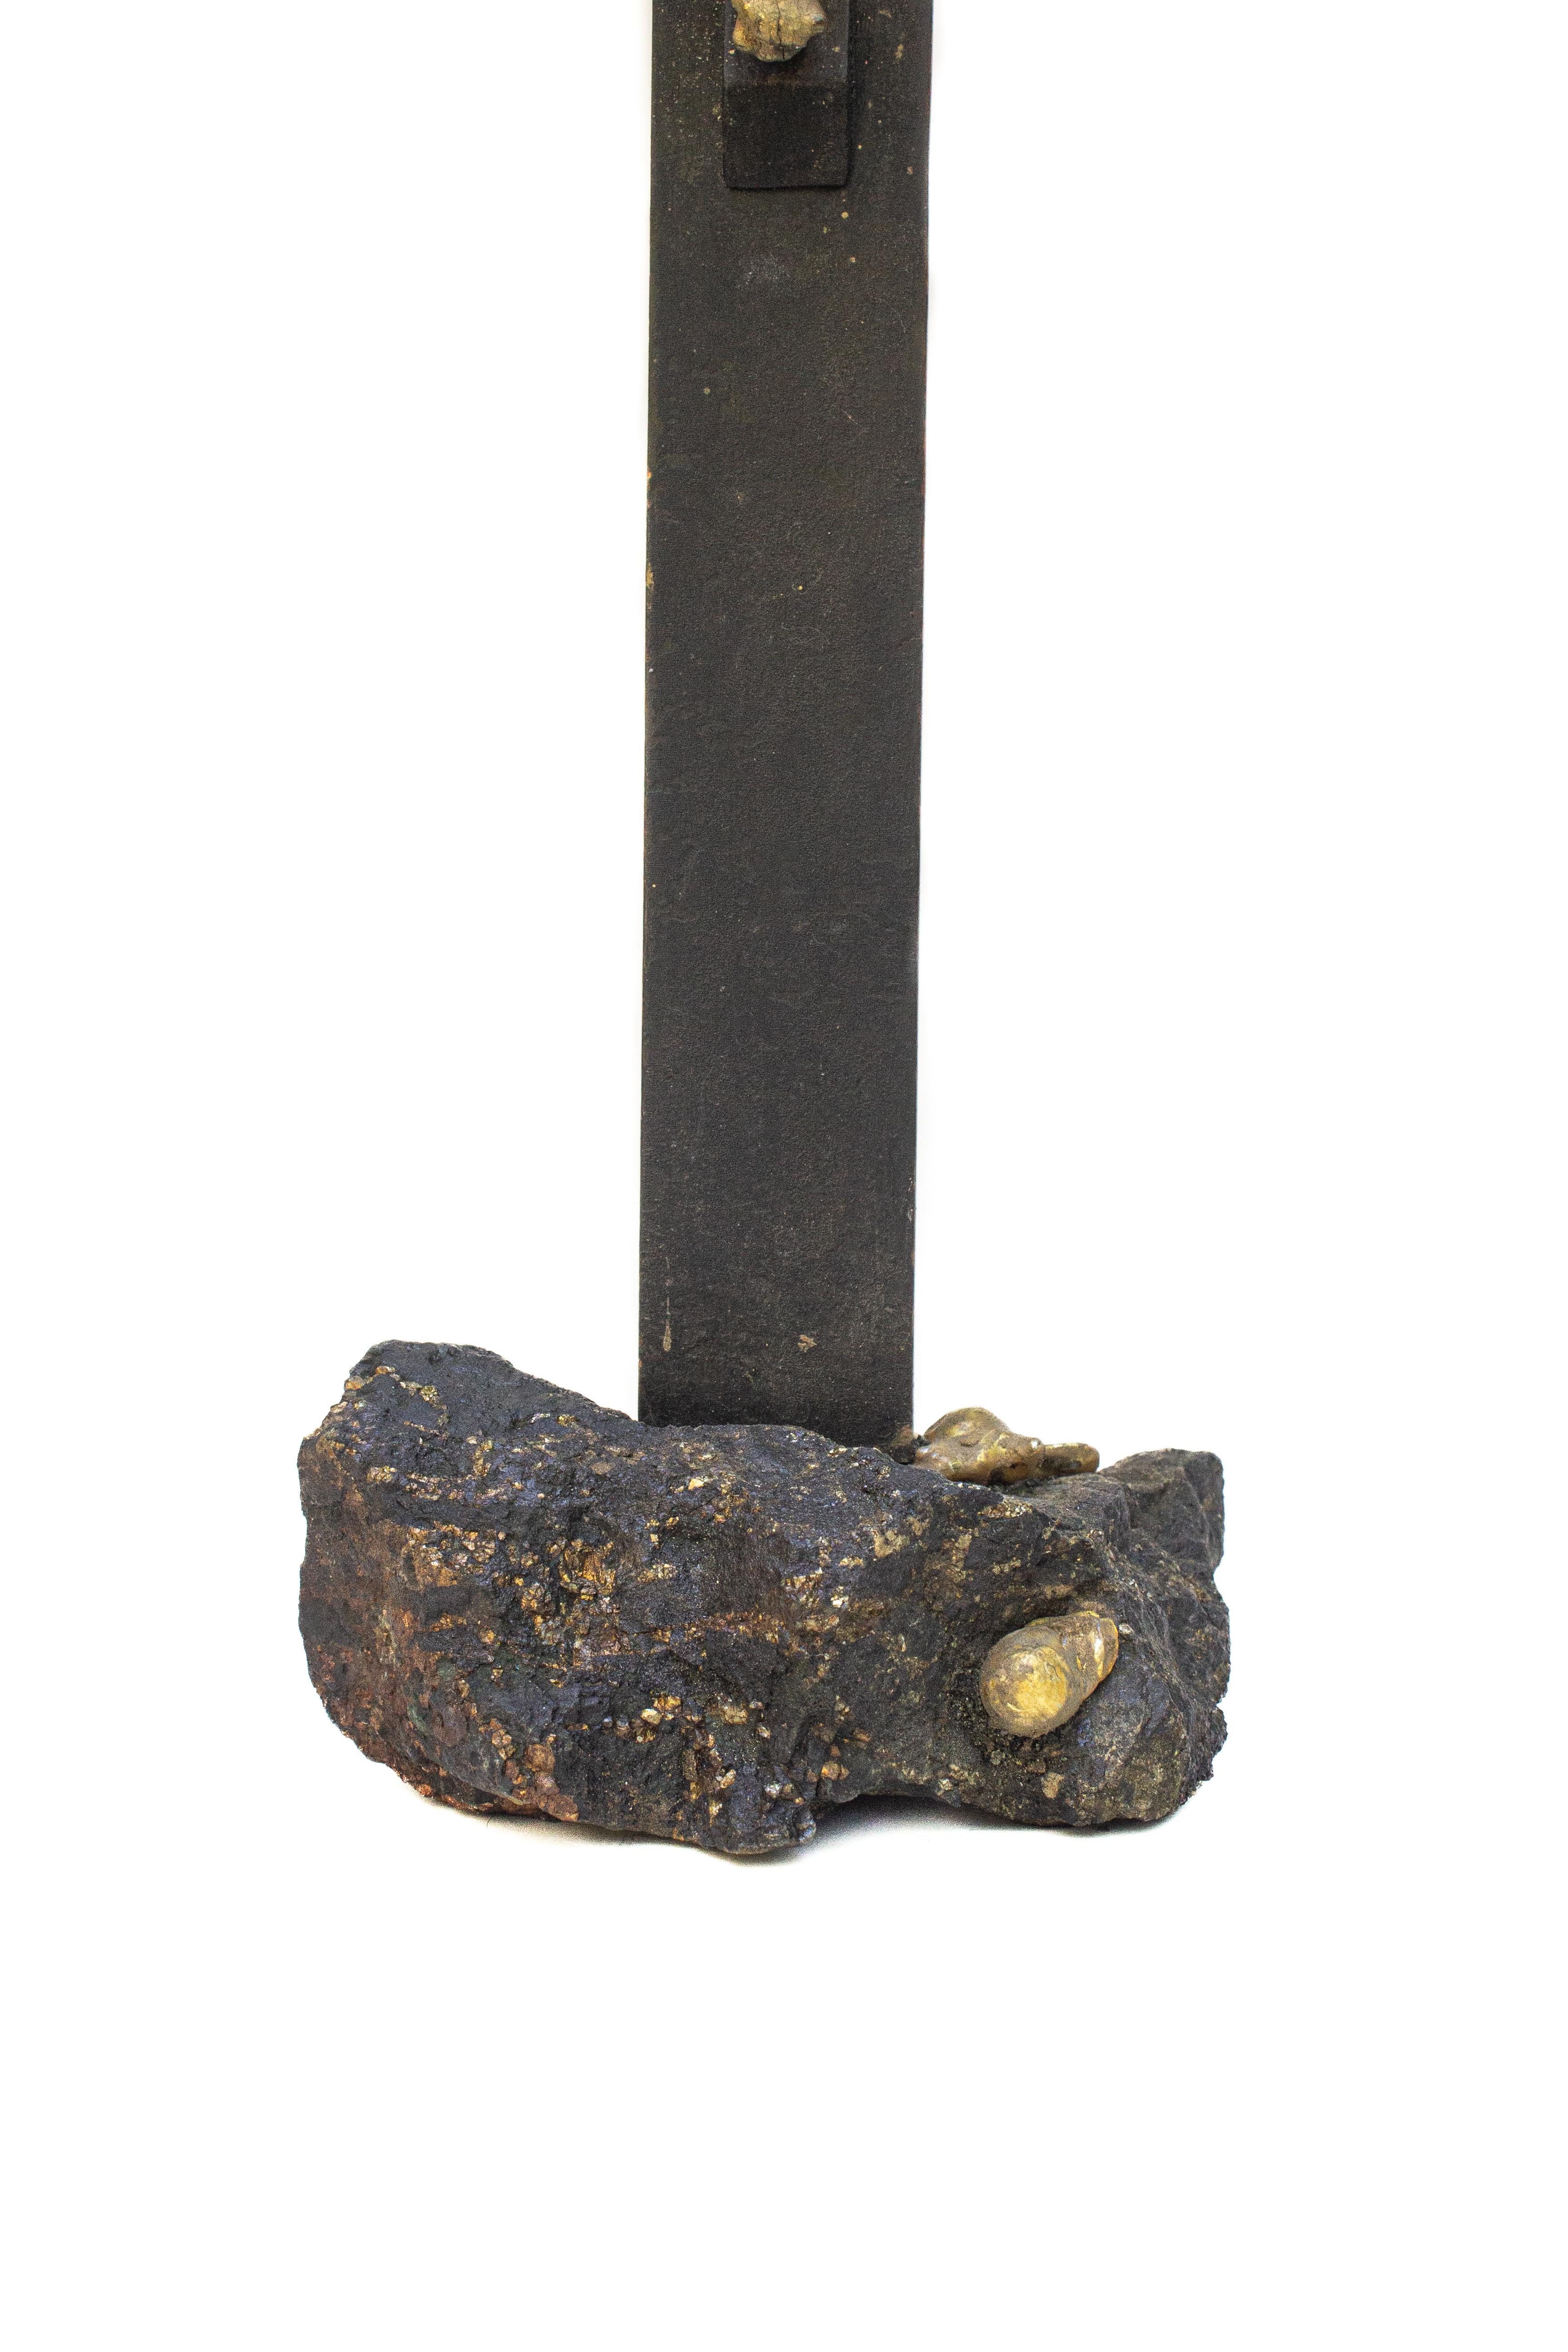 18th Century and Earlier 18th Century Italian Black and Gold Crucifix Mounted on Bornite and Chalcopyrite